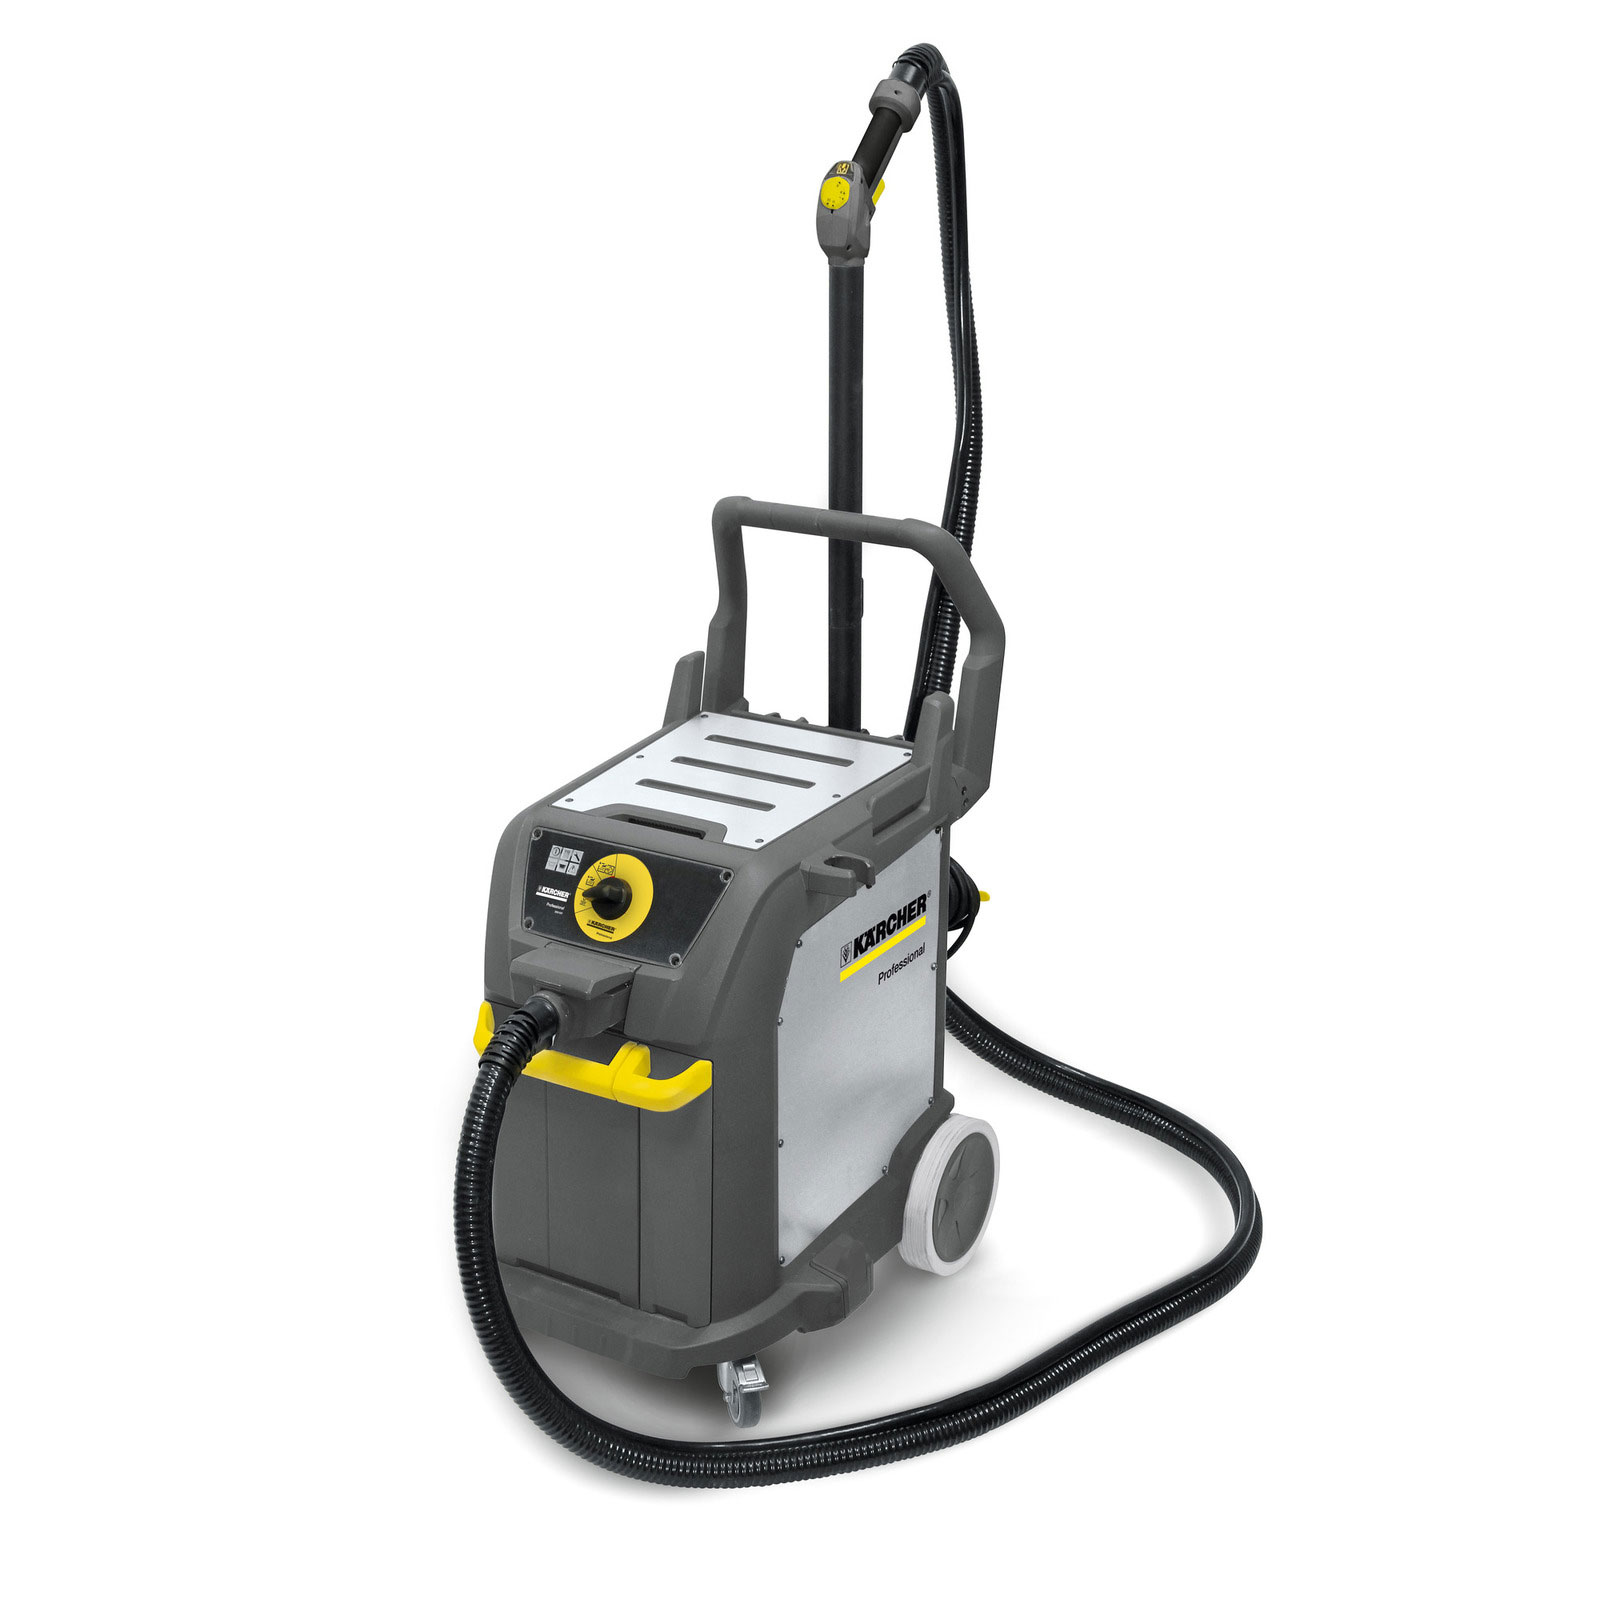 Karcher SGV 6/5 Steam Vapor Vacuum Cleaner 1.092-003.0 (up to 327 degrees F) 120V Freight Included GTIN 886622002123